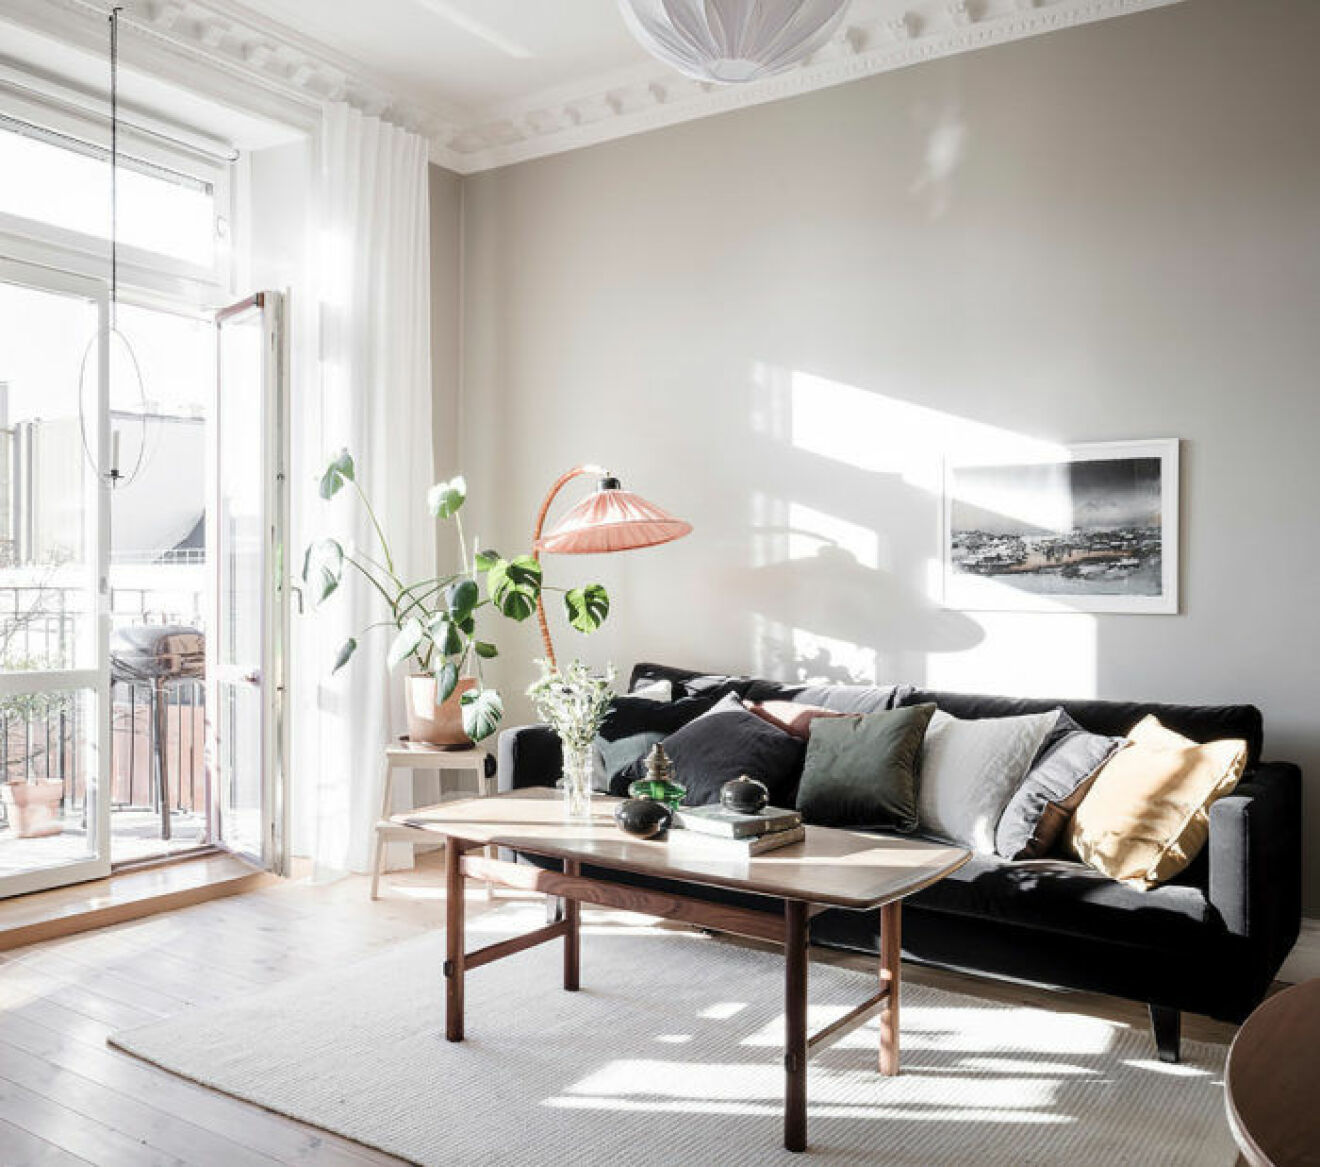 Livingroom in light colours, green plants and pink details. Scandinavian interior decoration ideas and inspiration.